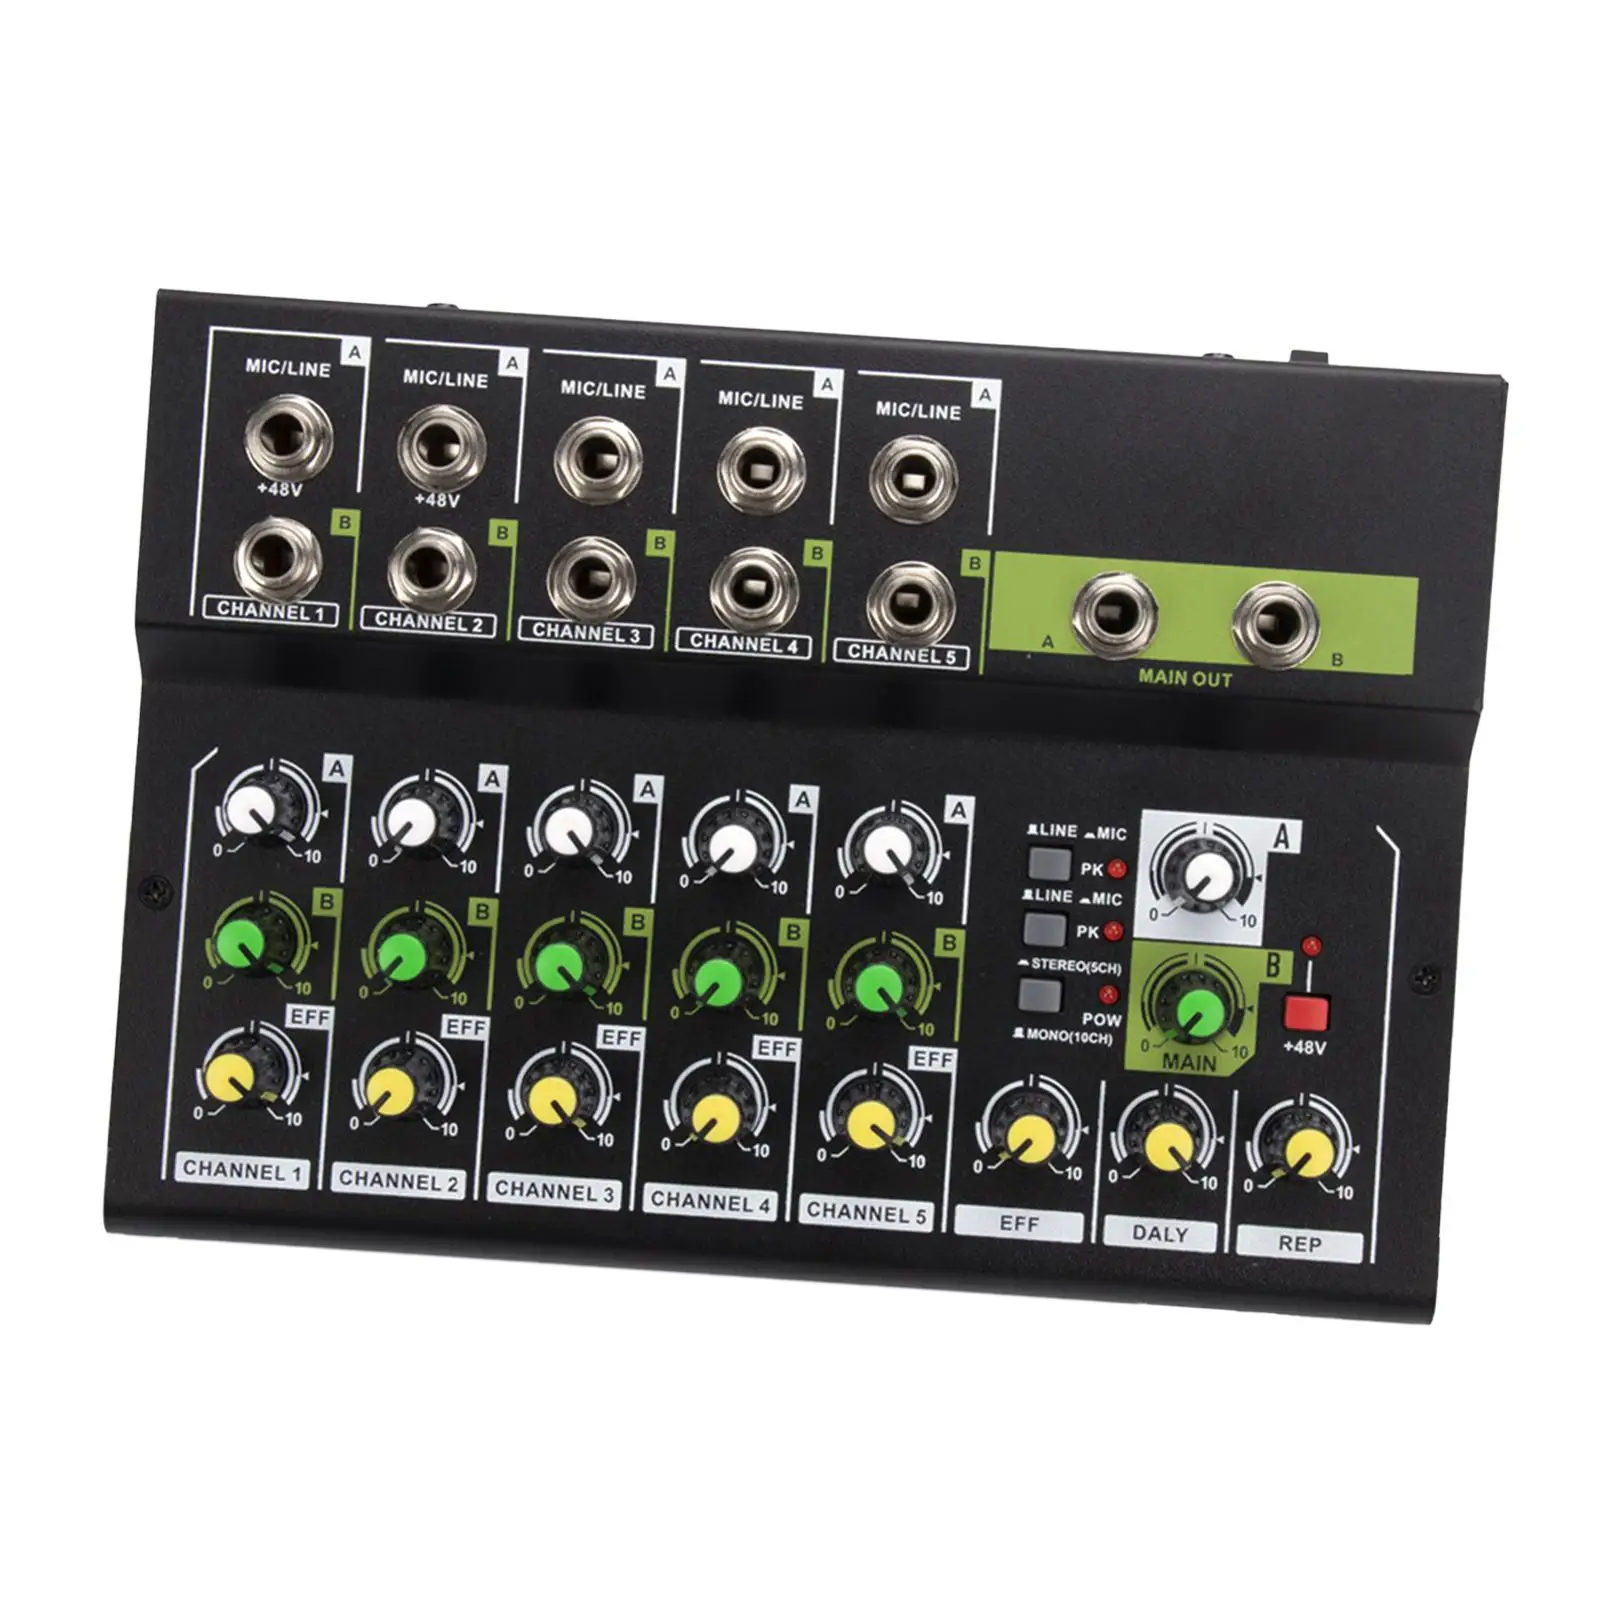 Audio Mixer 10 Channel 48V Power RCA Line Mixer Sound Controller for Beginners Live DJ Broadcast Recording